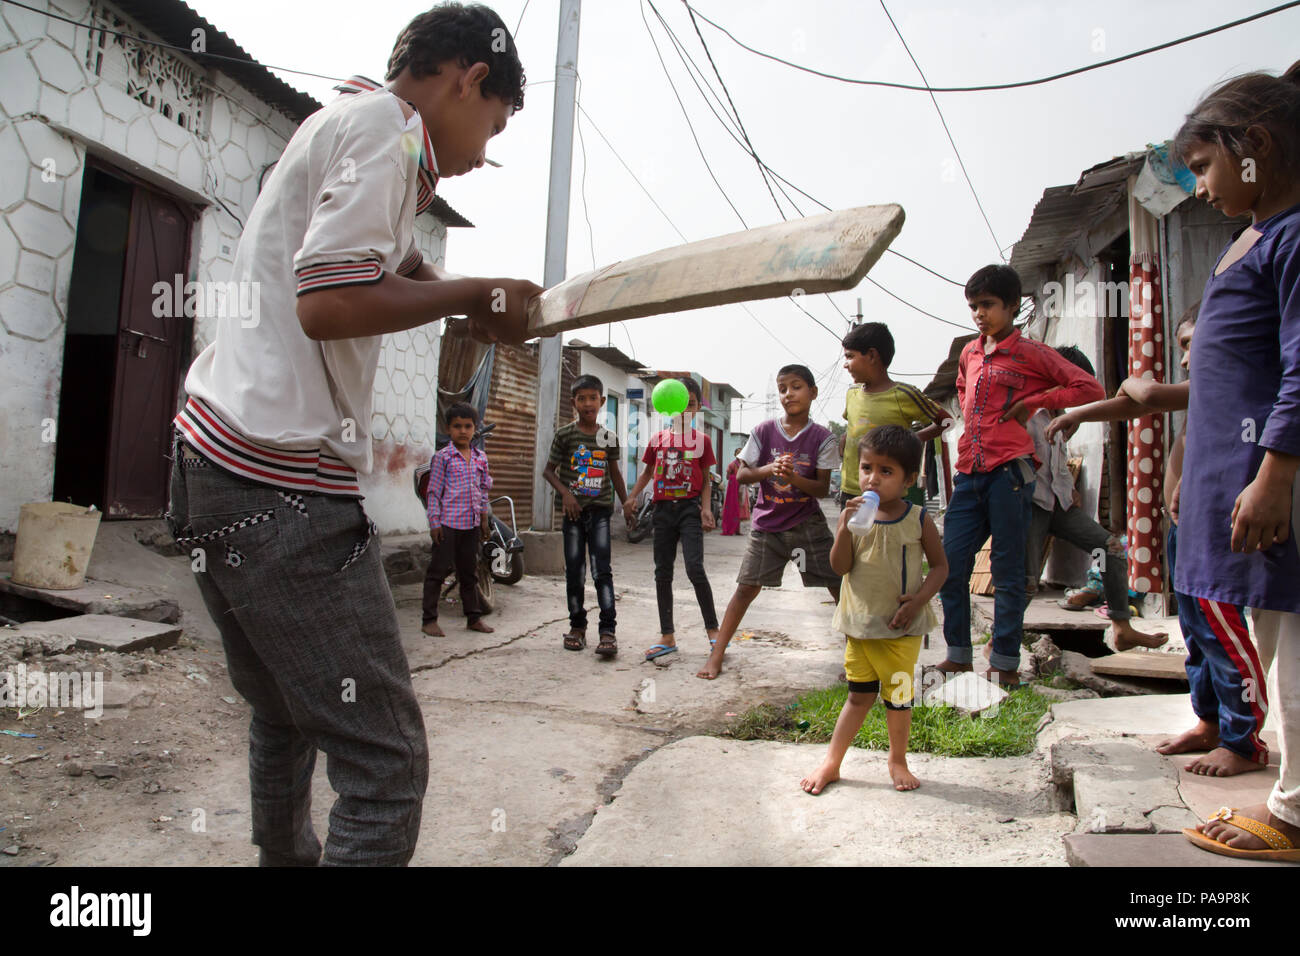 Kids playing cricket in Arif Nagar area, near the abandoned Union Carbide industrial complex, Bhopal, India Stock Photo